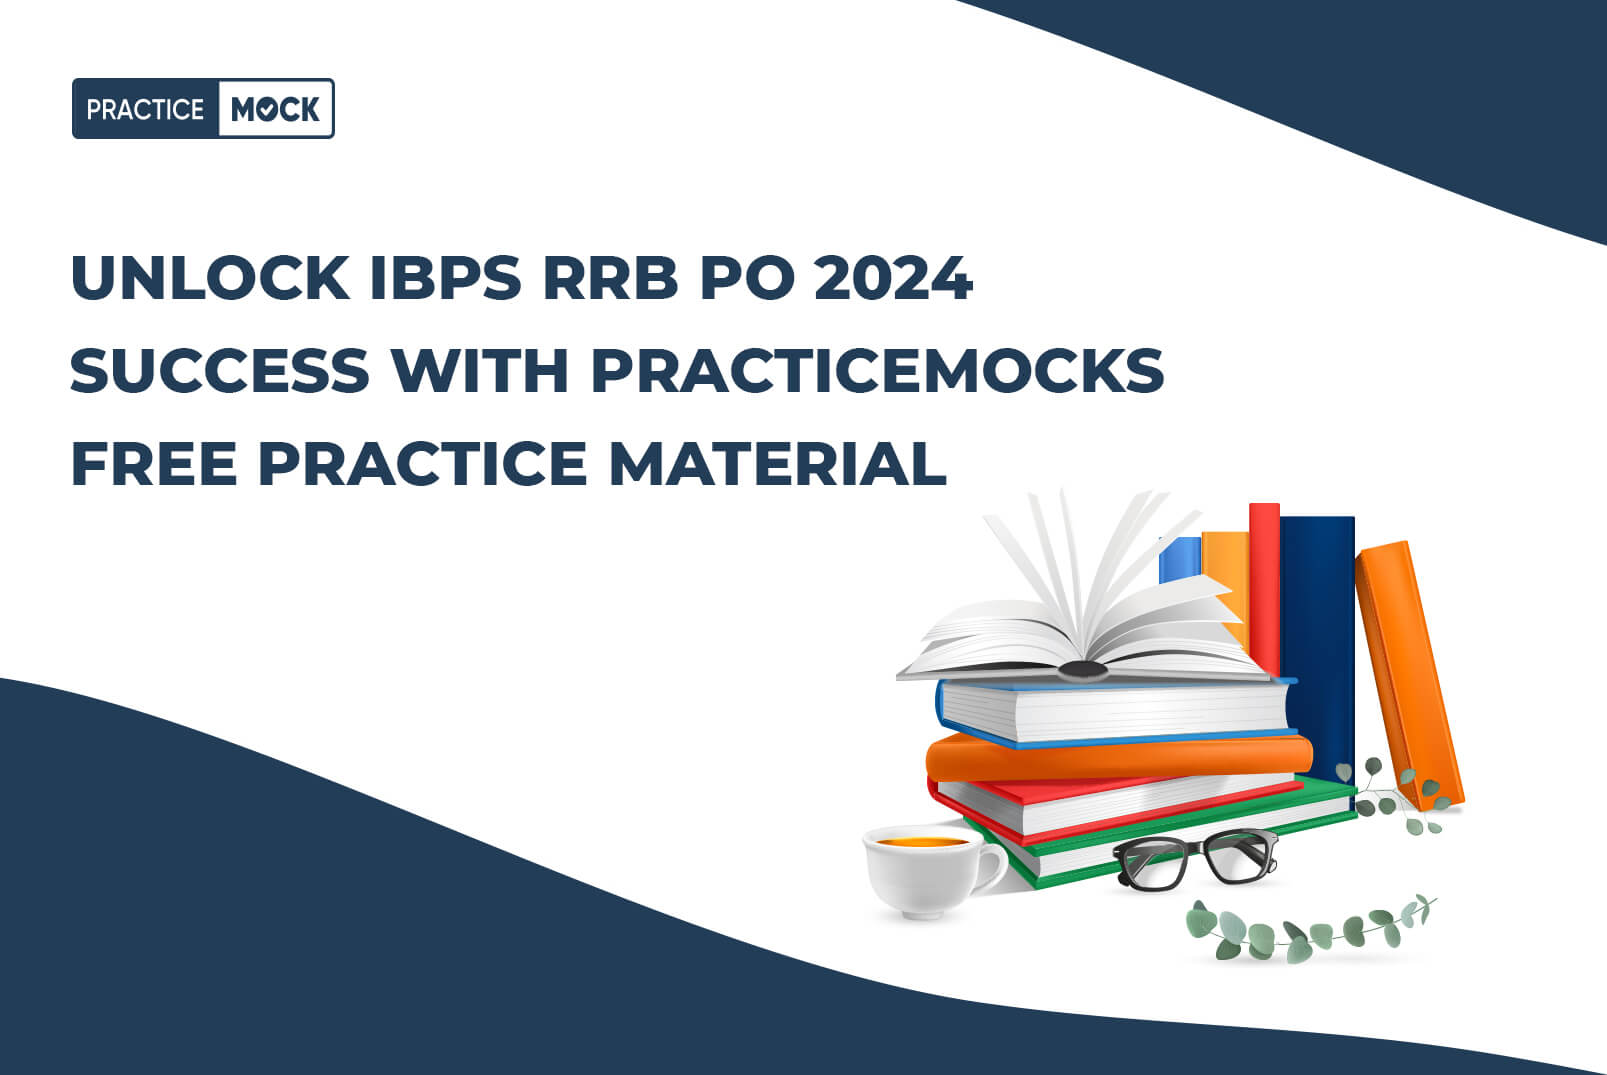 Unlock IBPS RRB PO 2024 Success with Practicemocks Free Practice Material